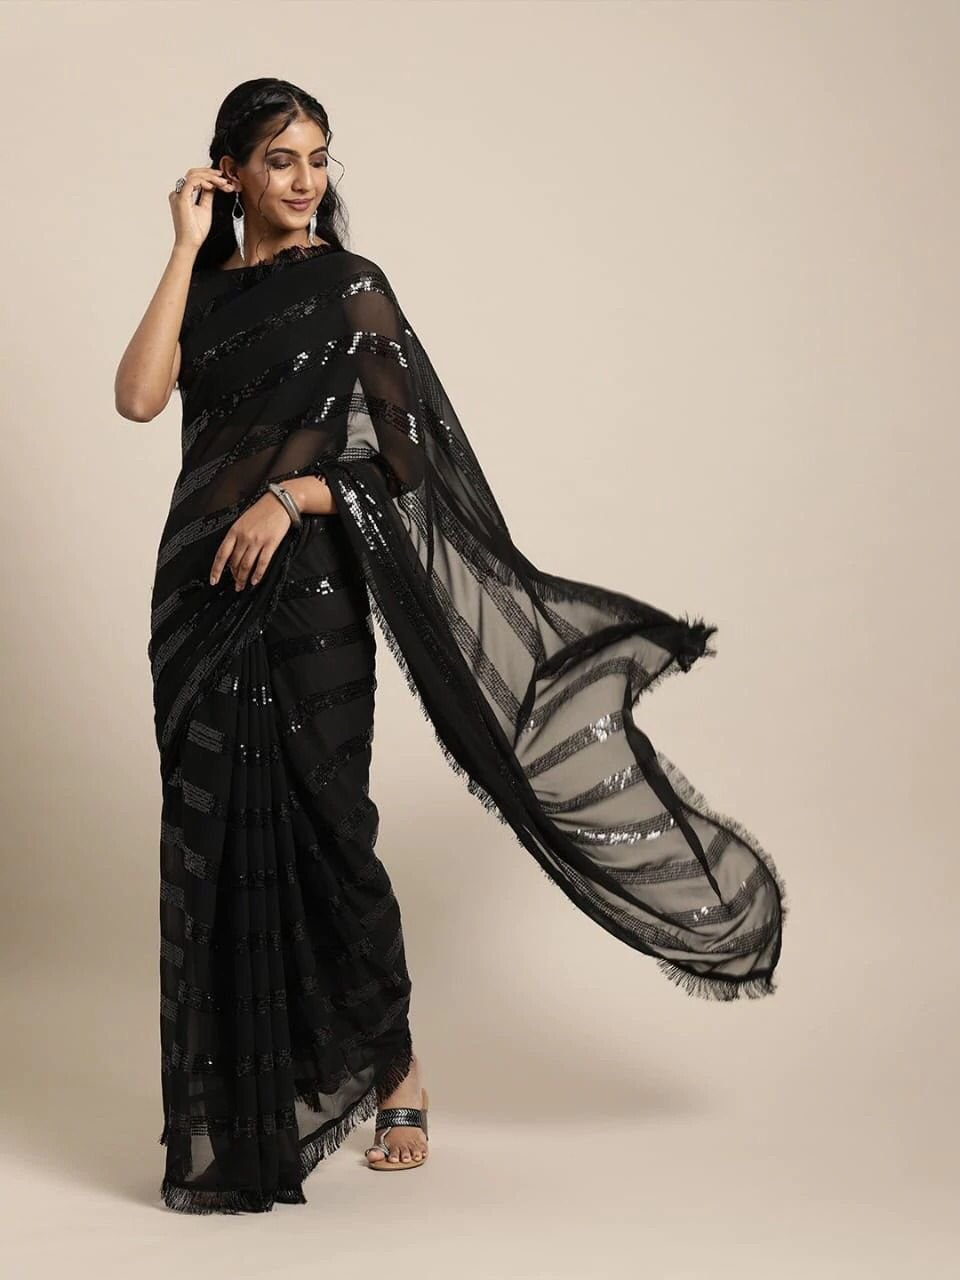 Best Simple Farewell Saree Ideas For School & College Party